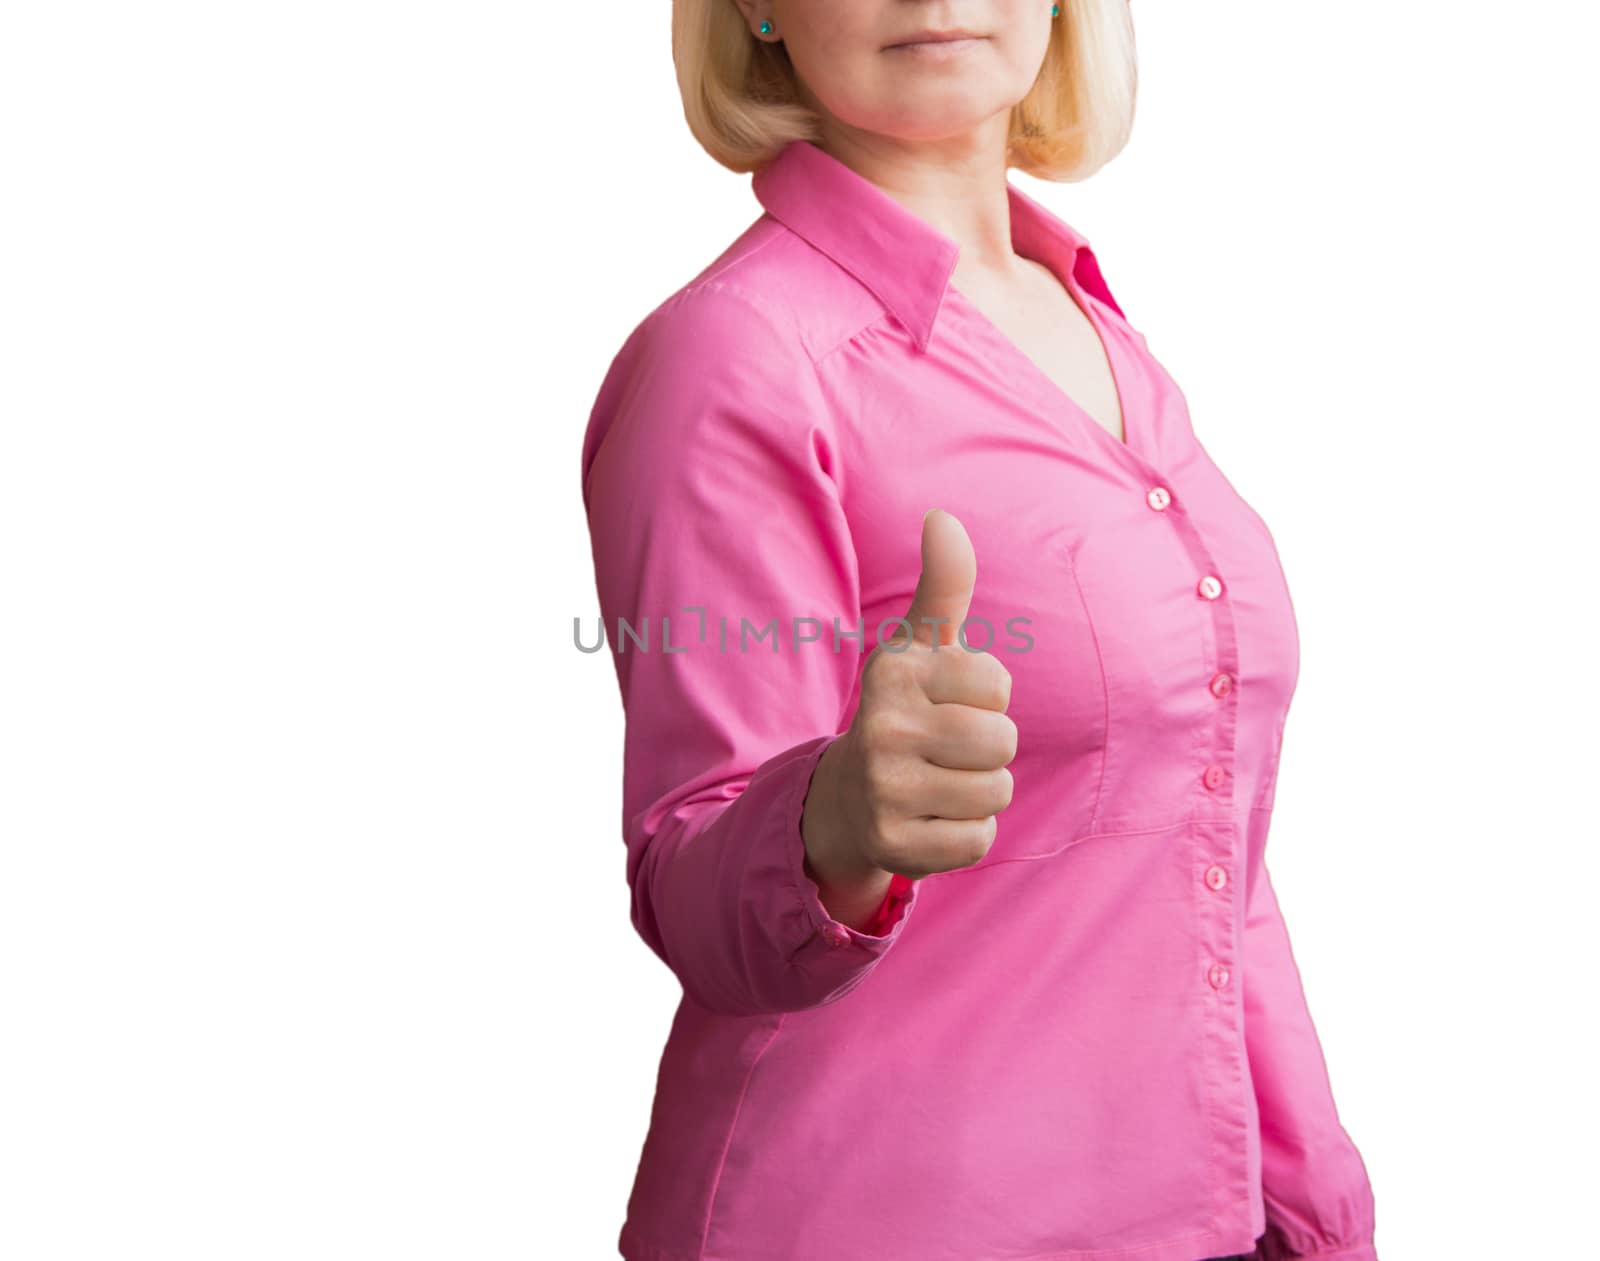 Successful blonde business woman showing thumbs up sign isolated closeup by claire_lucia